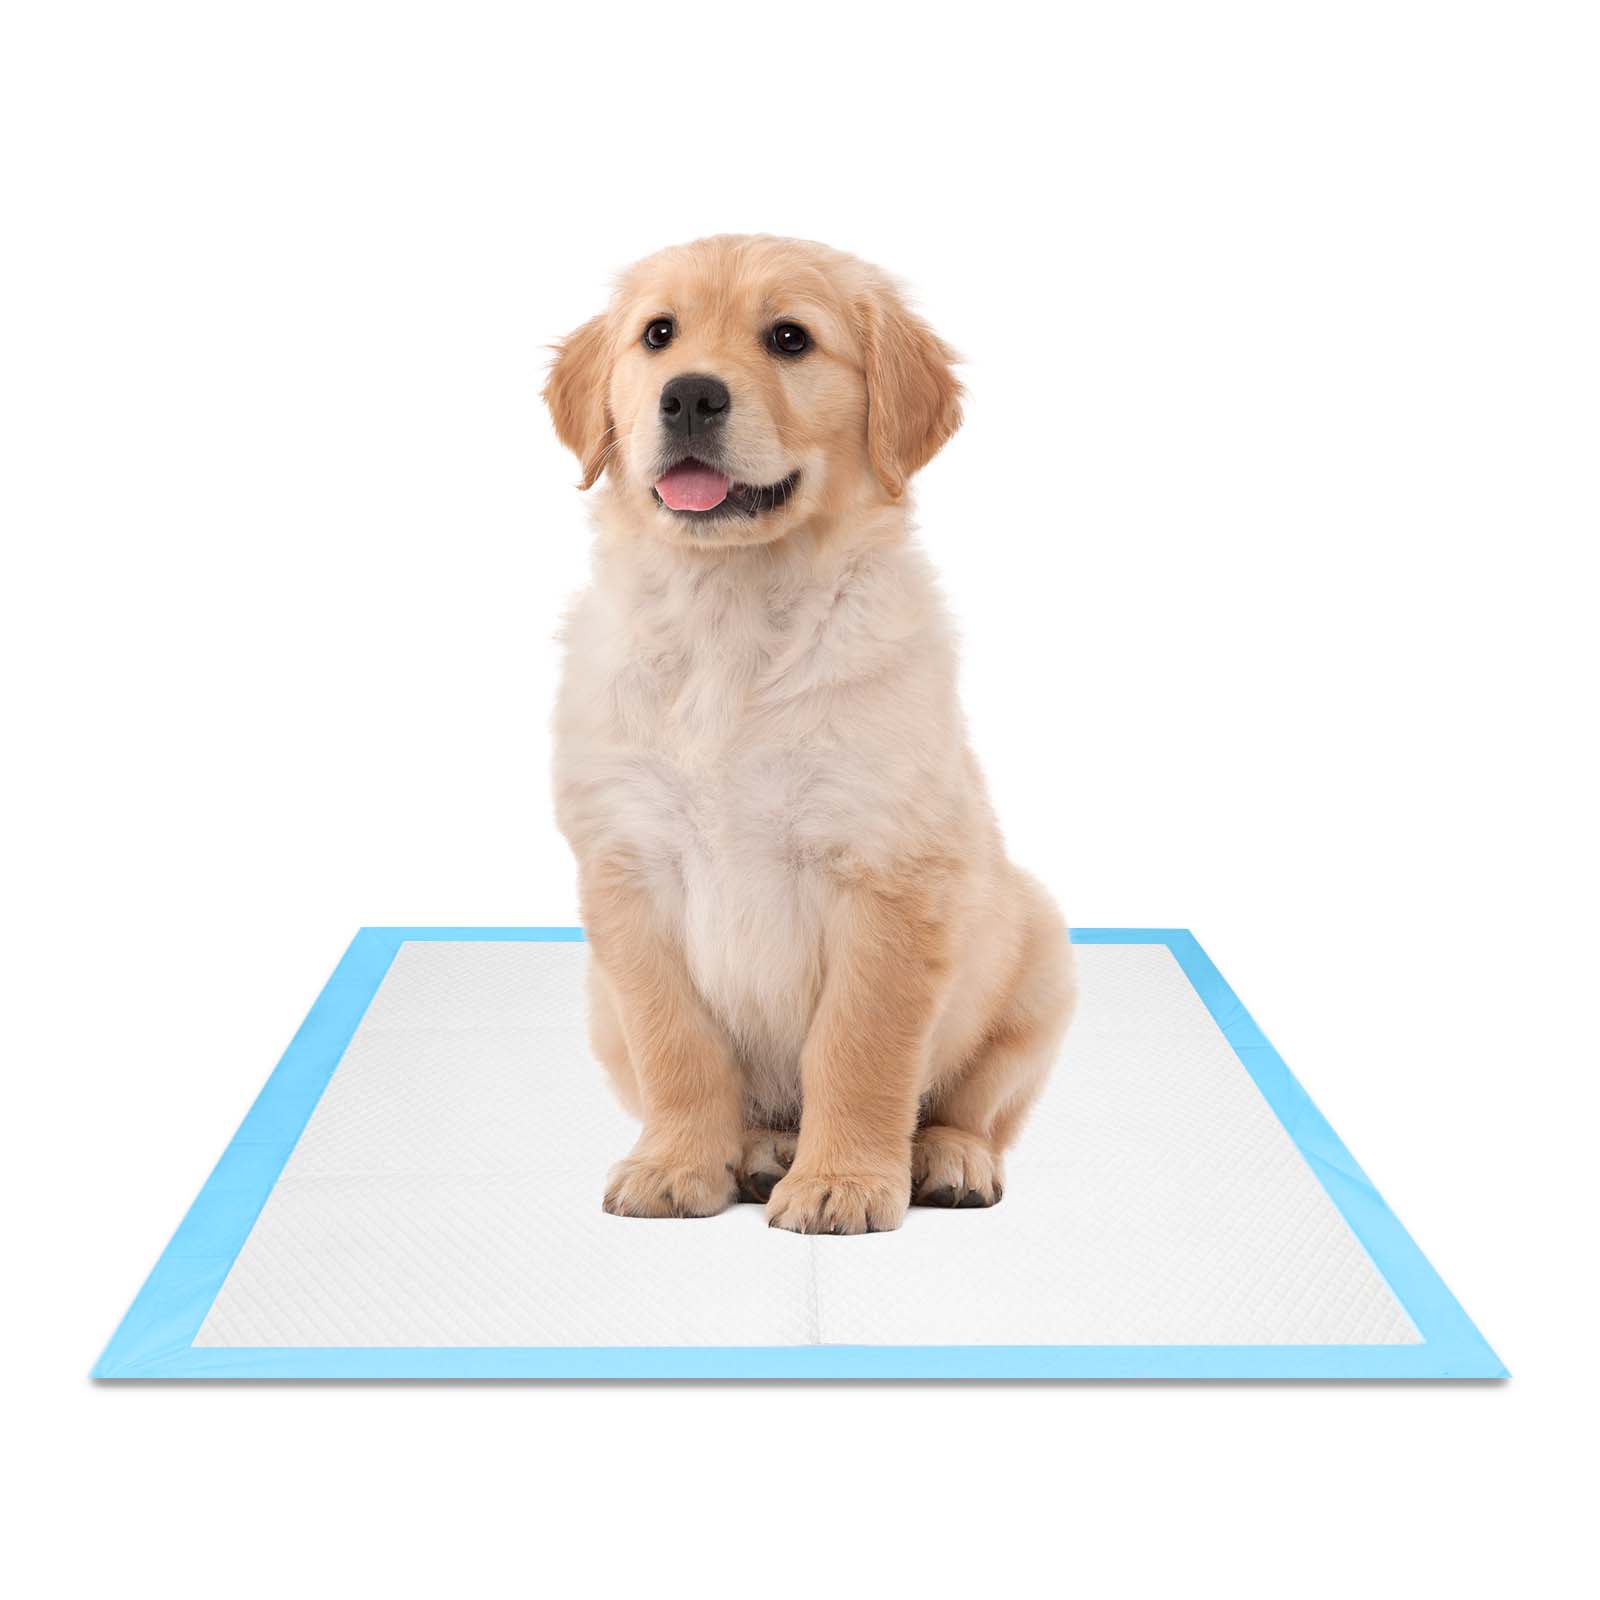 Petfamily Dog Training Pads, Puppy Pads, Super Absorbent, 22 in x 22 in, 100 Count - image 3 of 8